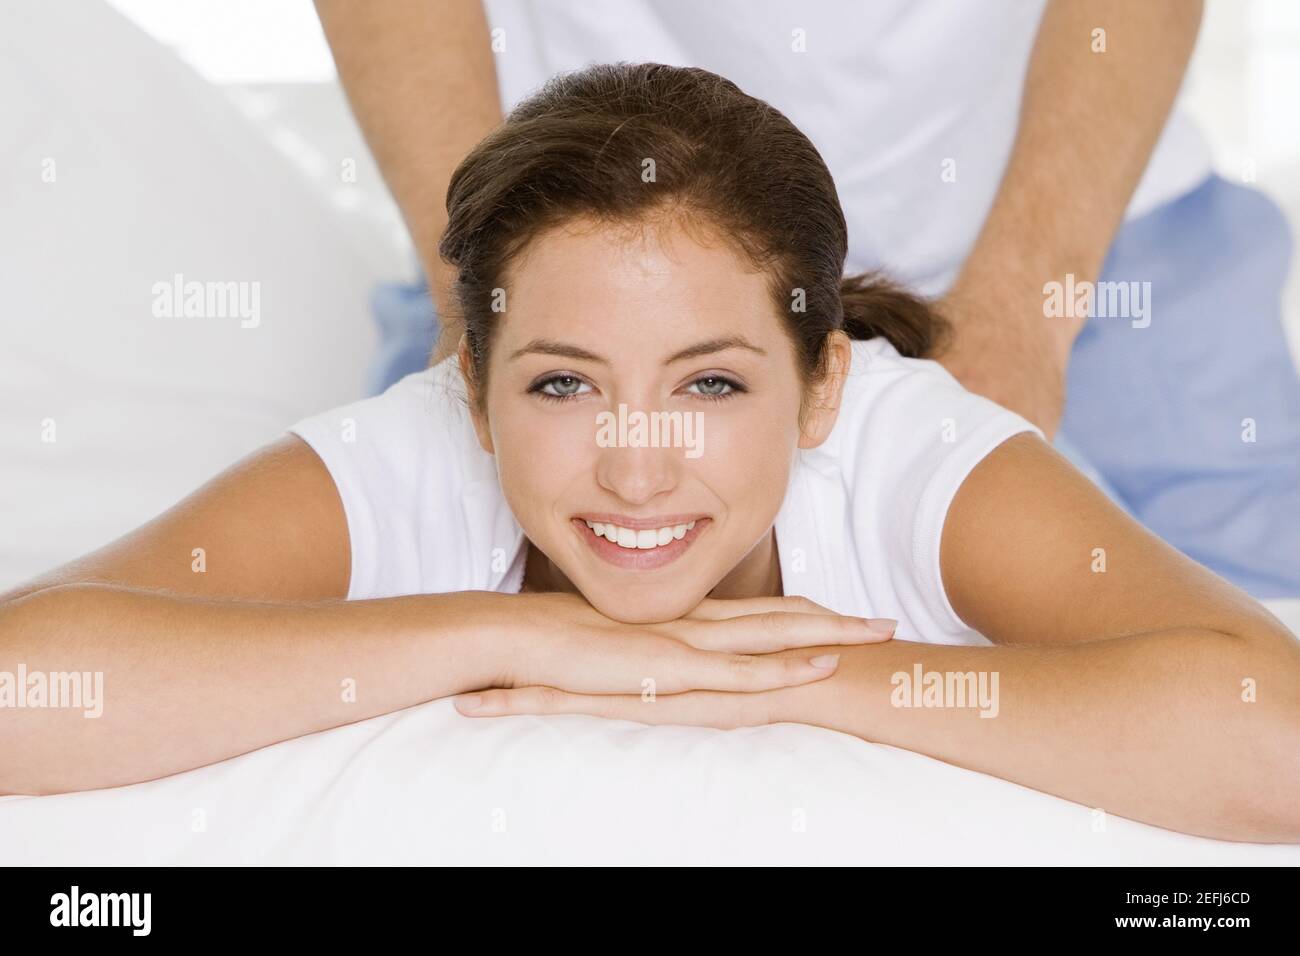 Portrait of a young woman getting a back massage from a young man Stock Photo